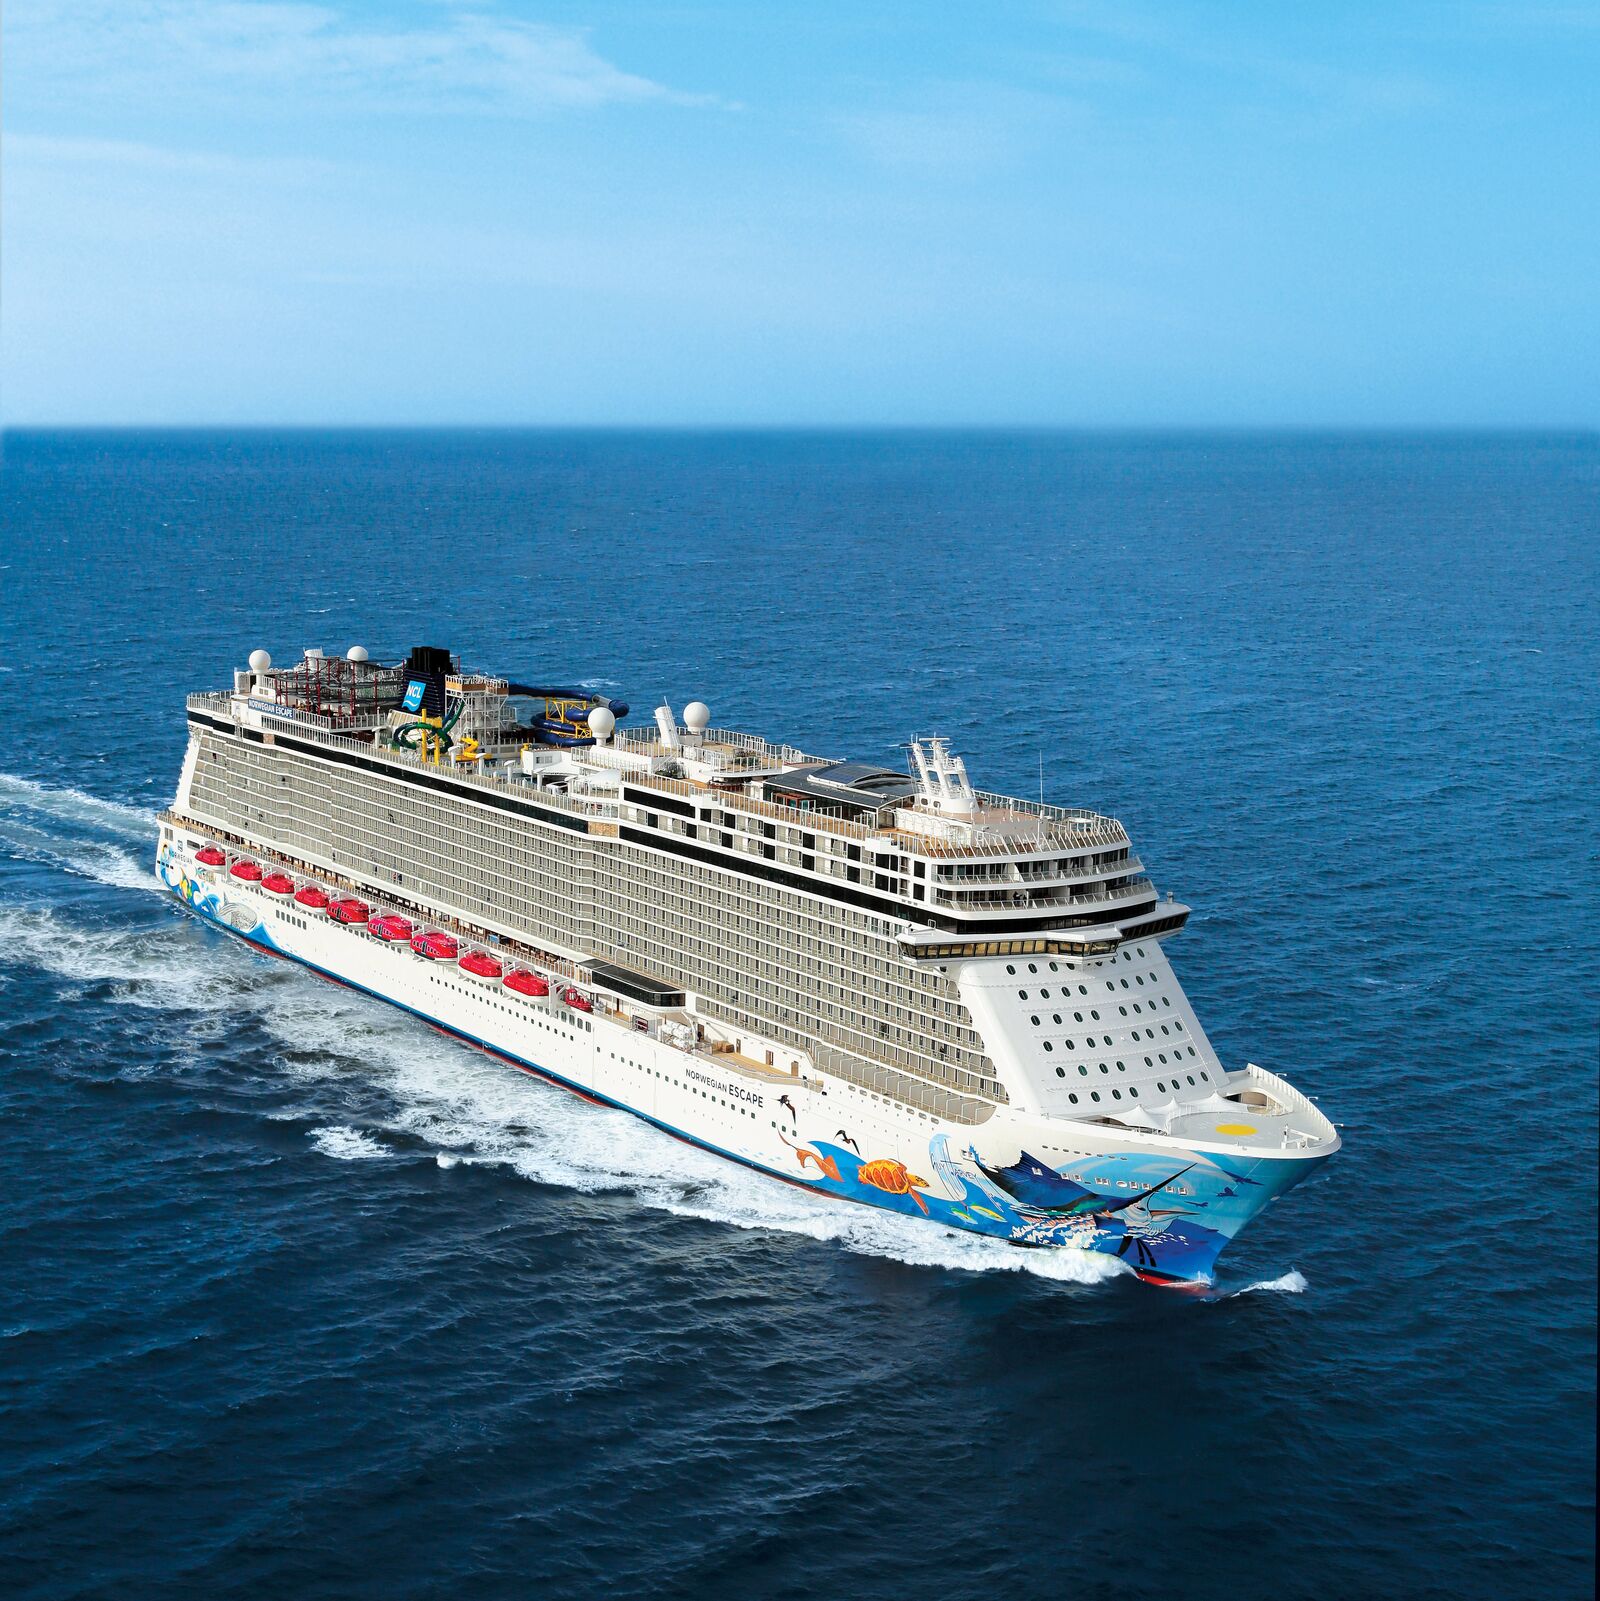 Norwegian Escape during Sea Trials along the coast of Norway